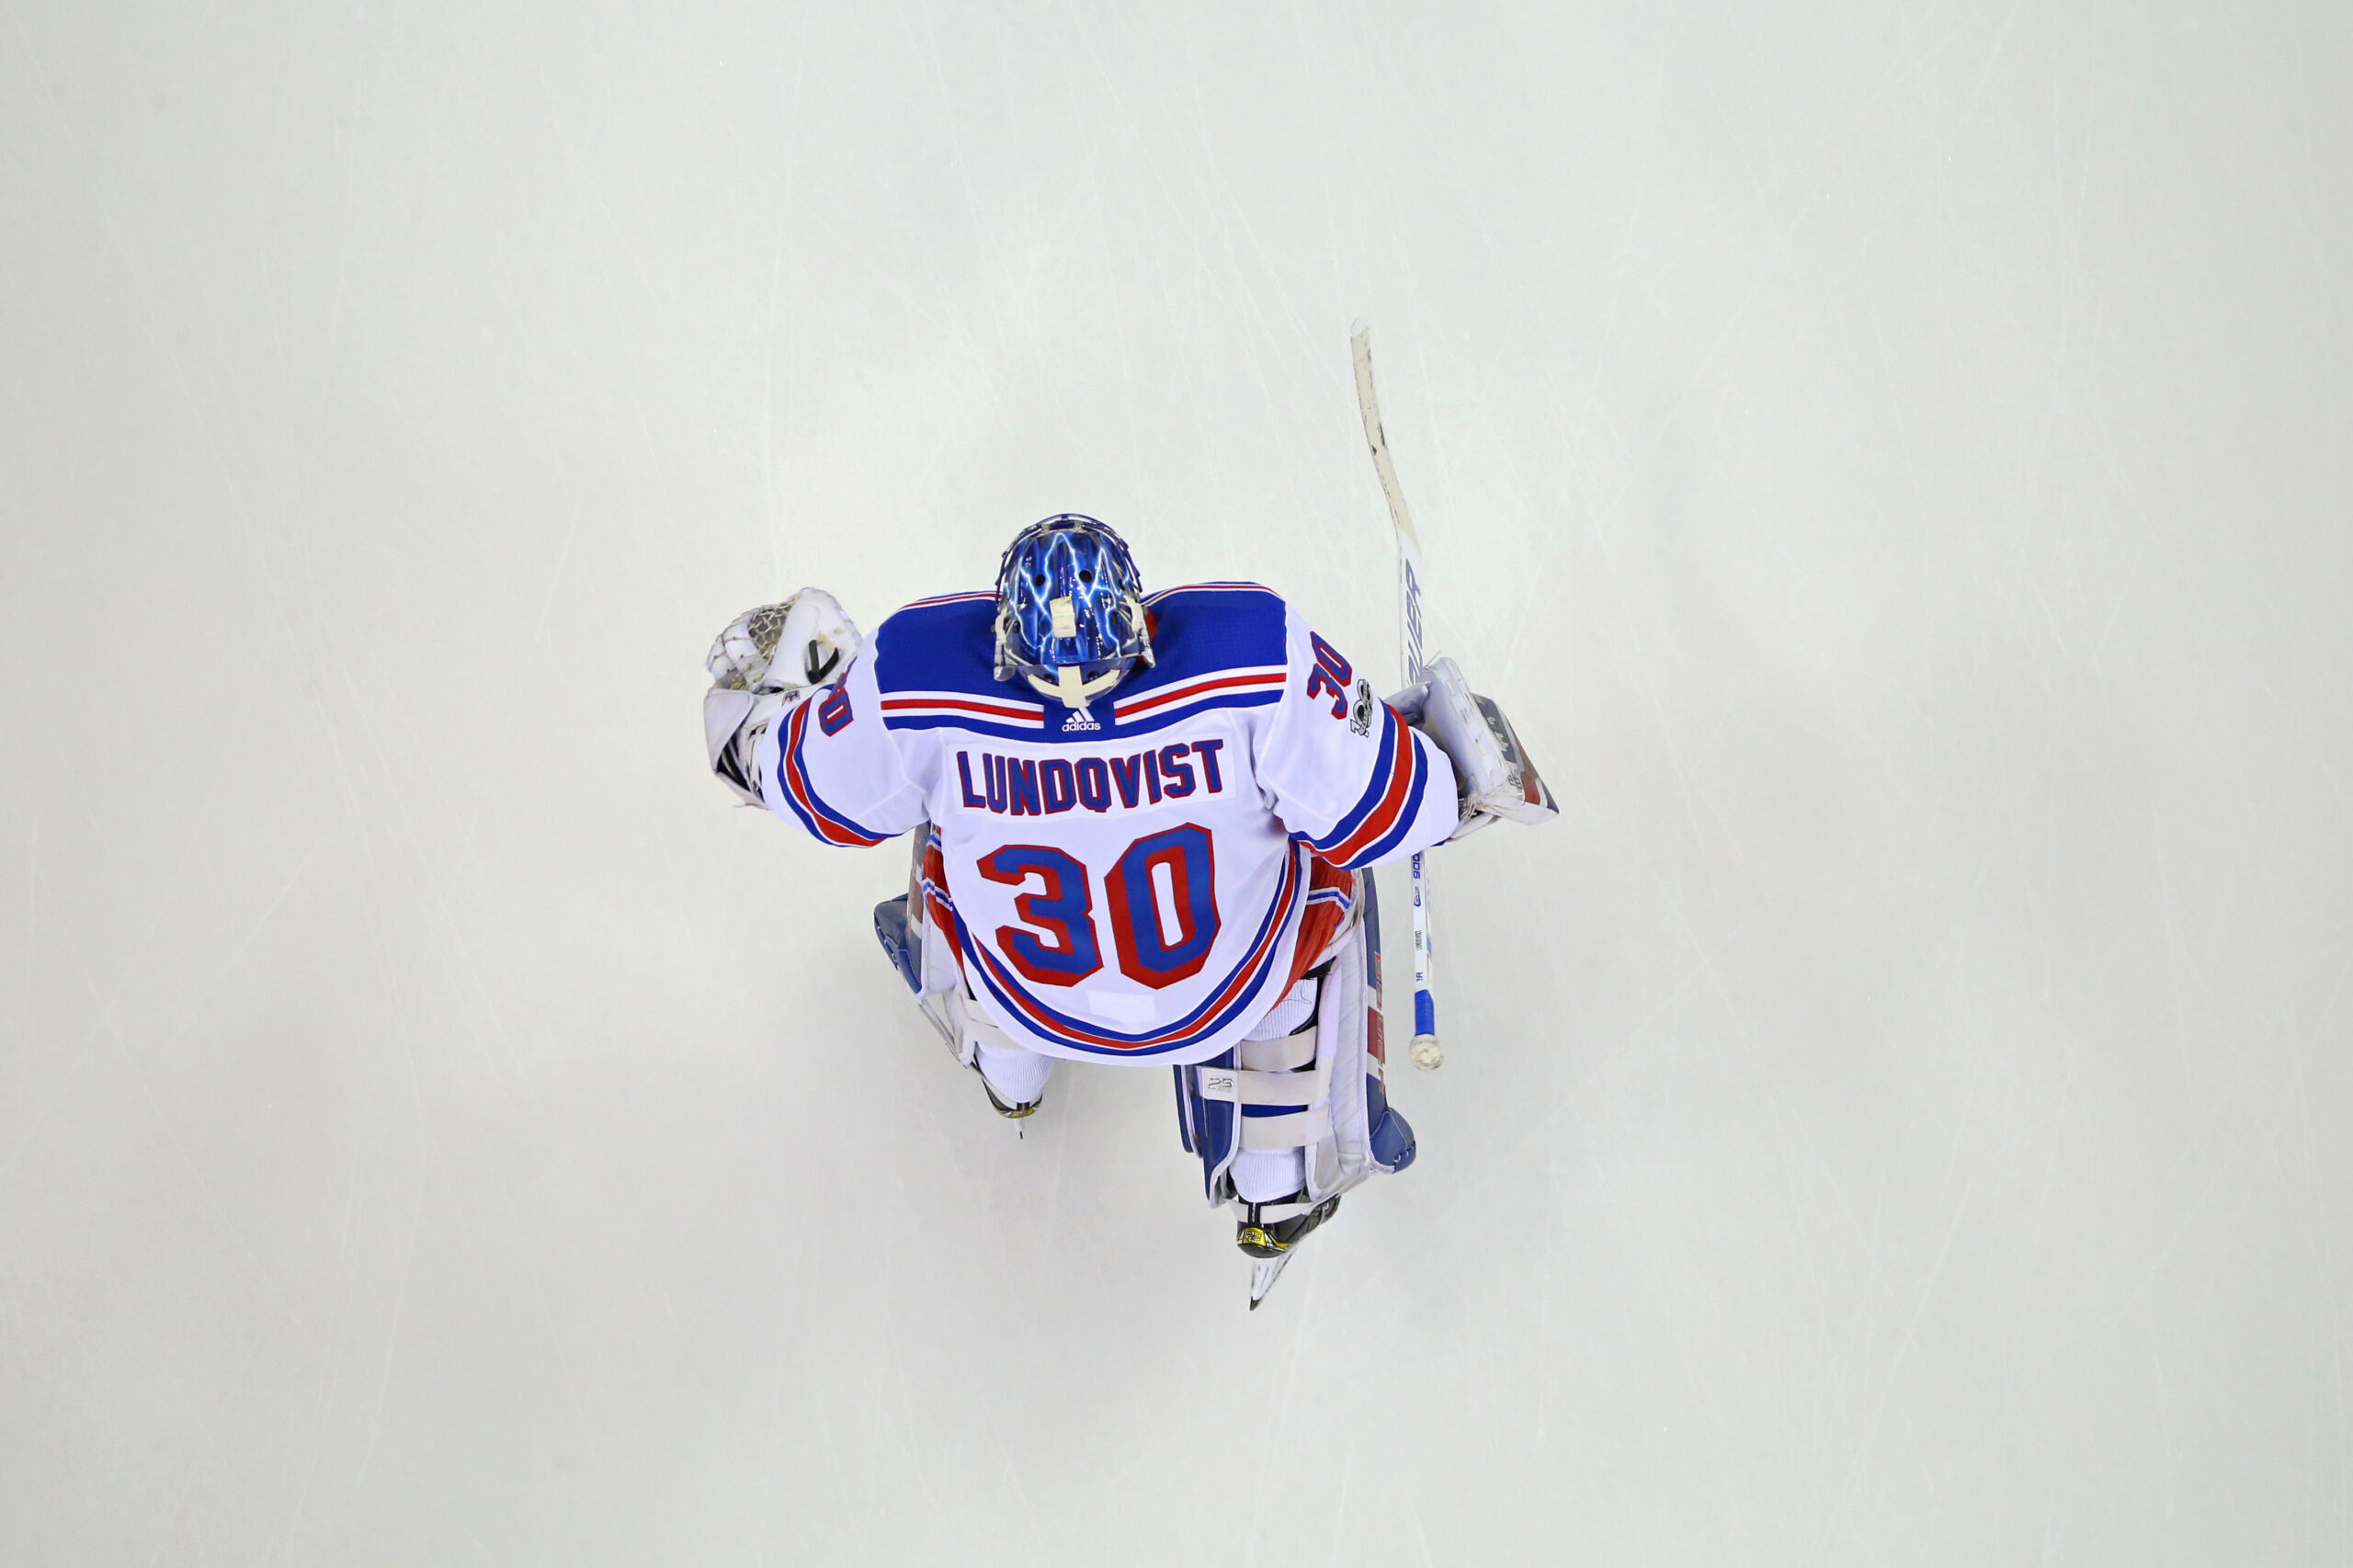 The Sparkling History Of New York Rangers Goalies: From Ed